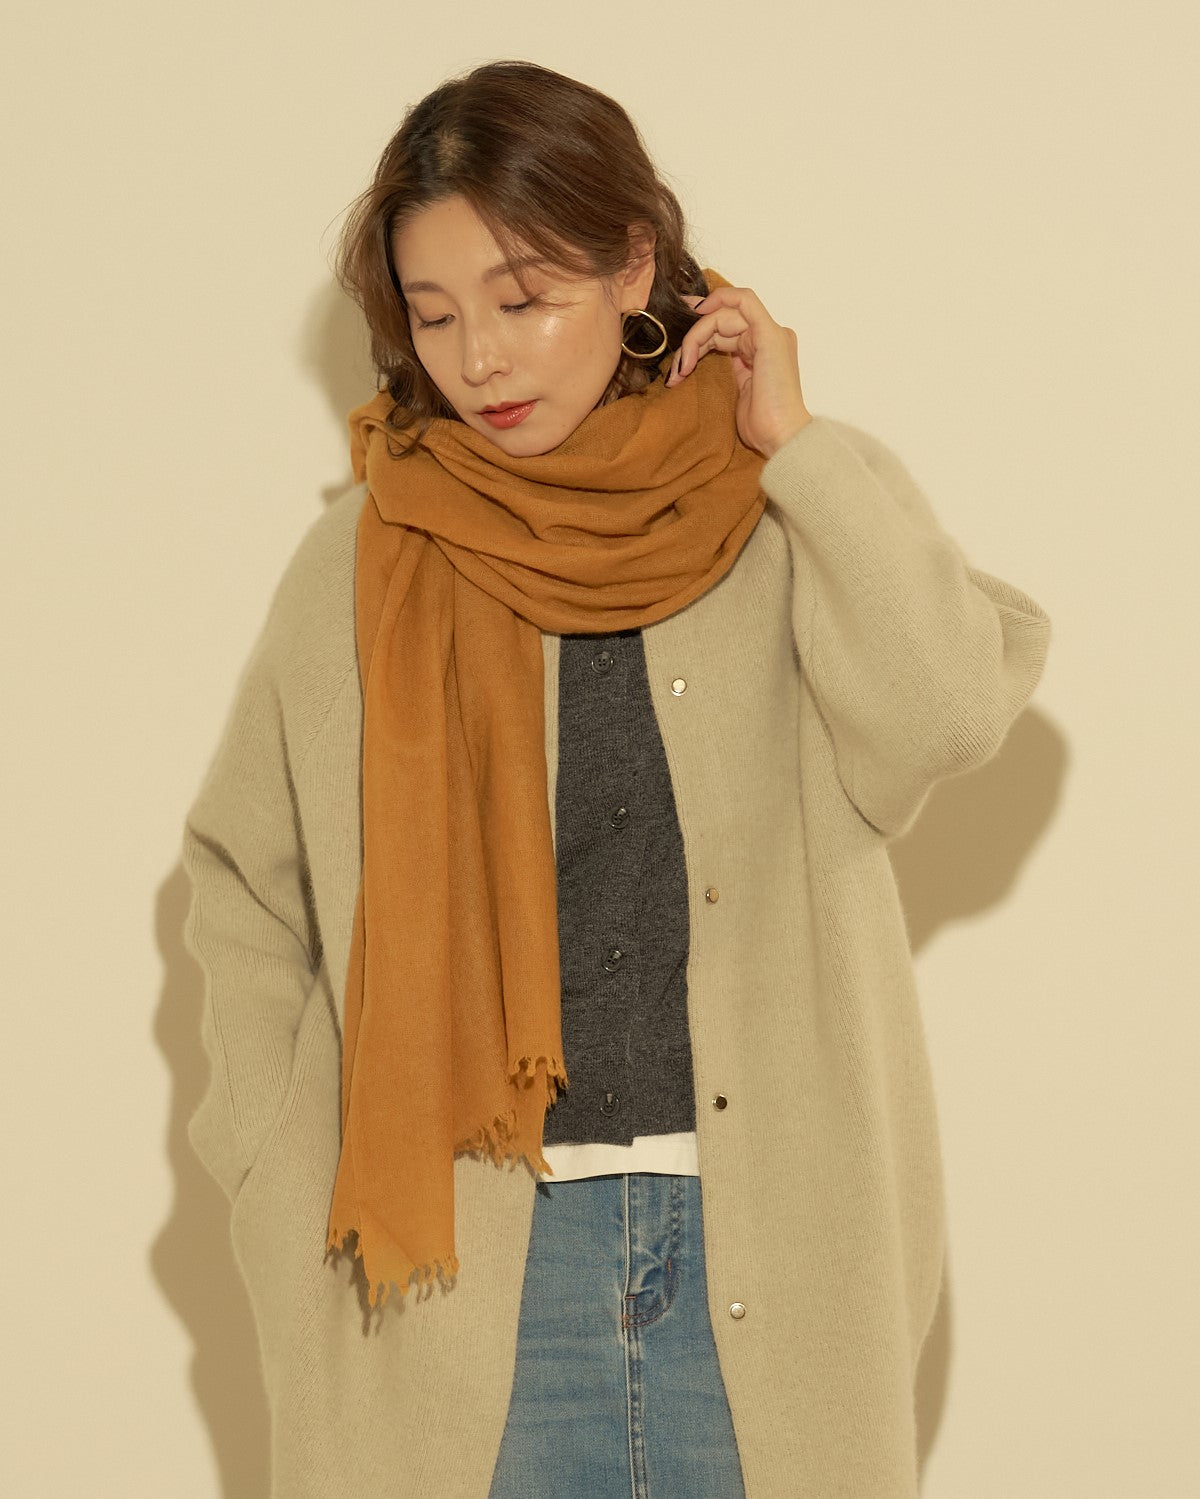 Cashmere Sheer Stole, カシミヤ薄手ストール